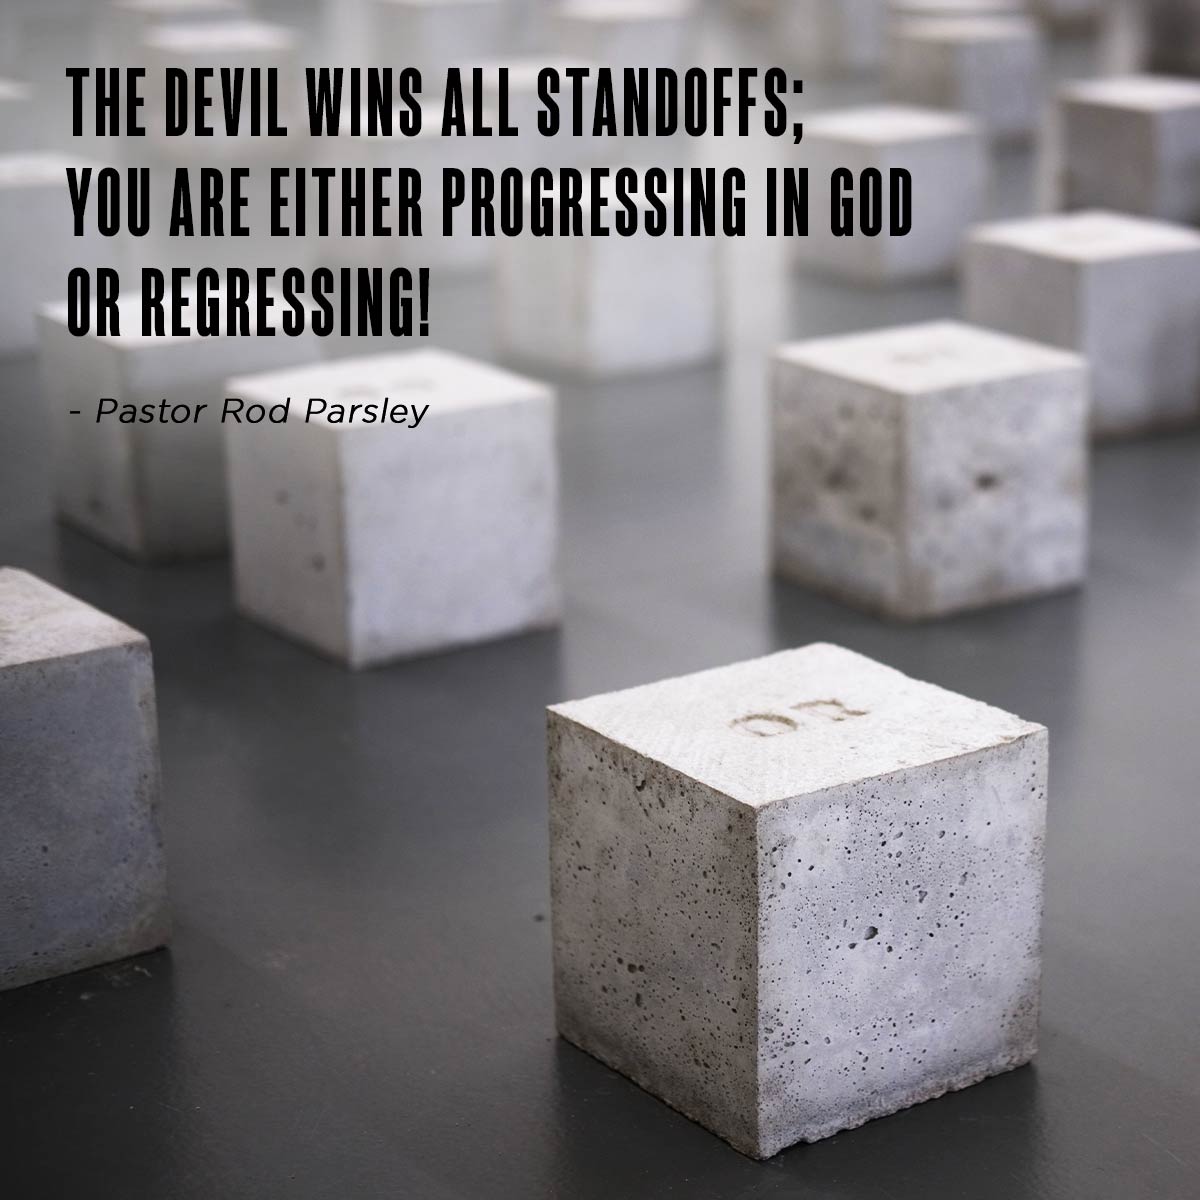 “The devil wins all standoffs; you are either progressing in God or regressing!” – Pastor Rod Parsley